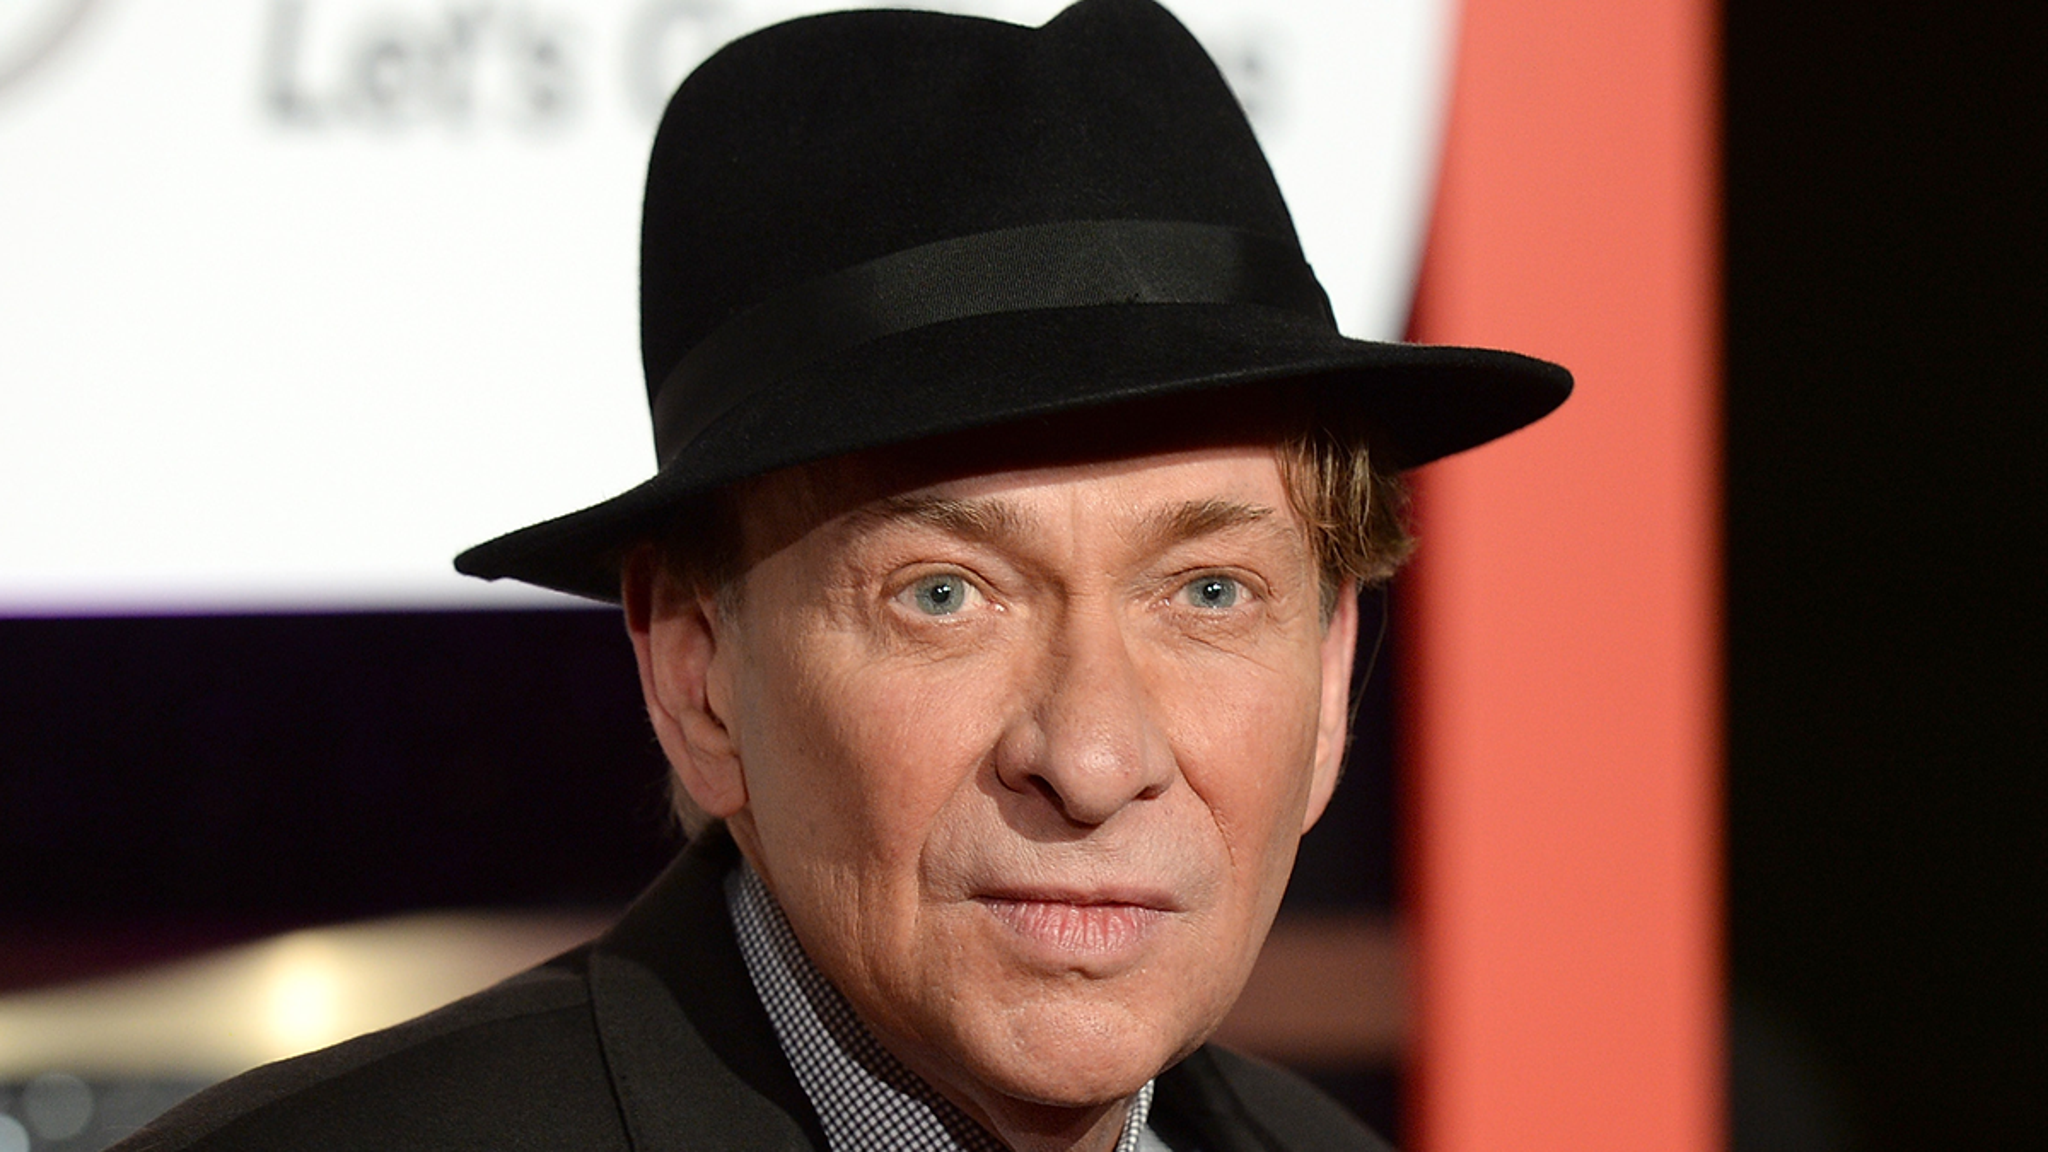 Bobby Caldwell, singer of “What You Won’t Do for Love” has died at the age of 71